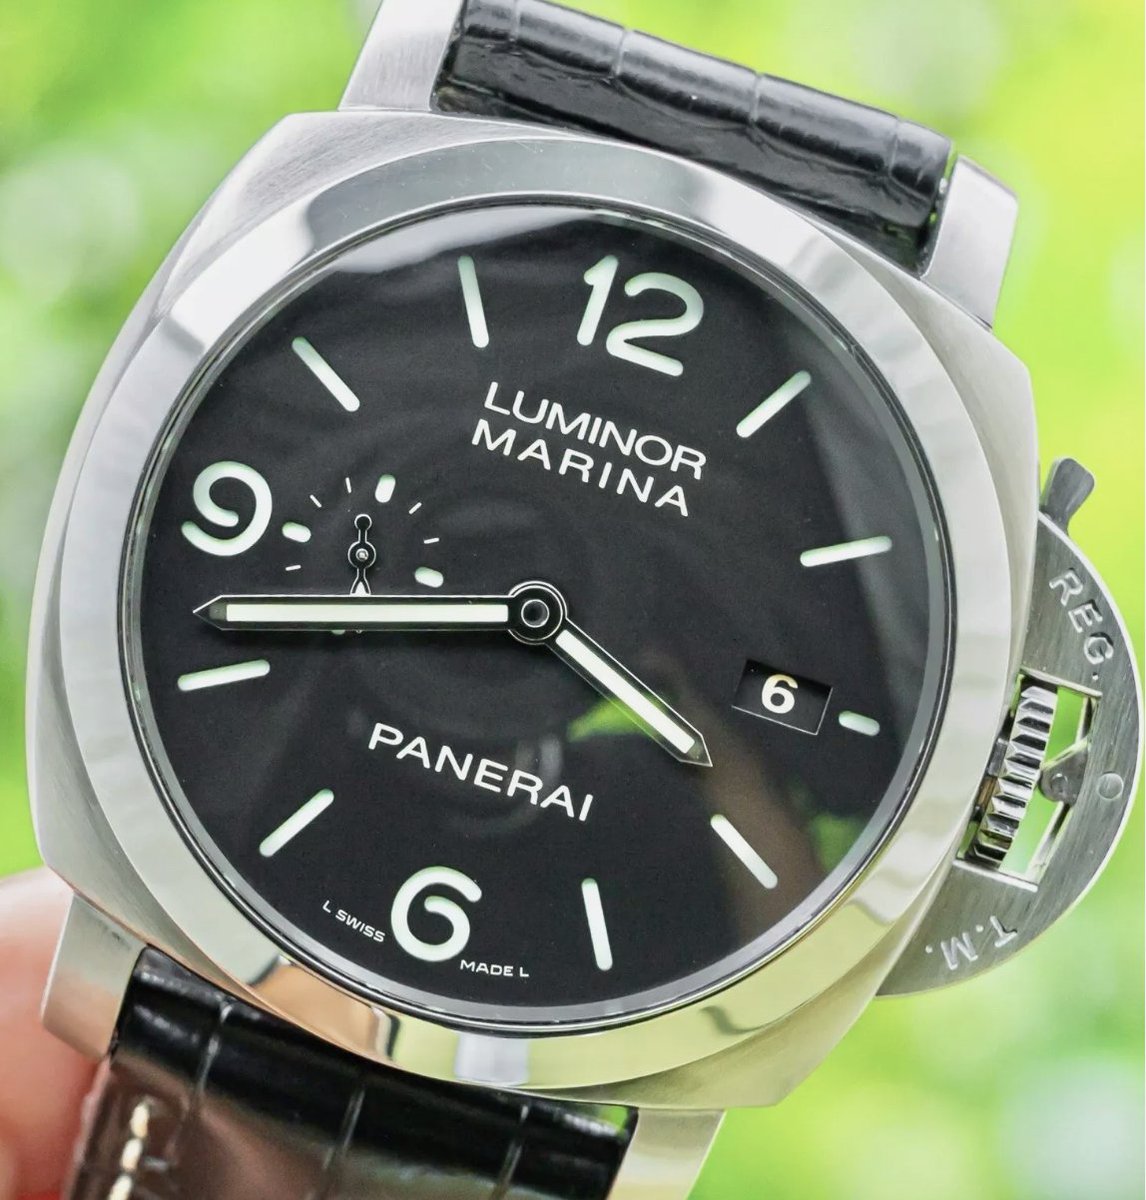 Panerai 312 Luminor Marina 3 Days 1950 SERVICED Boxes Papers PAM00312 PAM 00312

For sale by @sivils_luxury

 $4,495

#panerai #watches #valueyourwatch #watchmarketplace #luxury #luxurylife #entrereneur #luxurywatch #luxurywatches #luxurydesign #businesswatch #watchfam